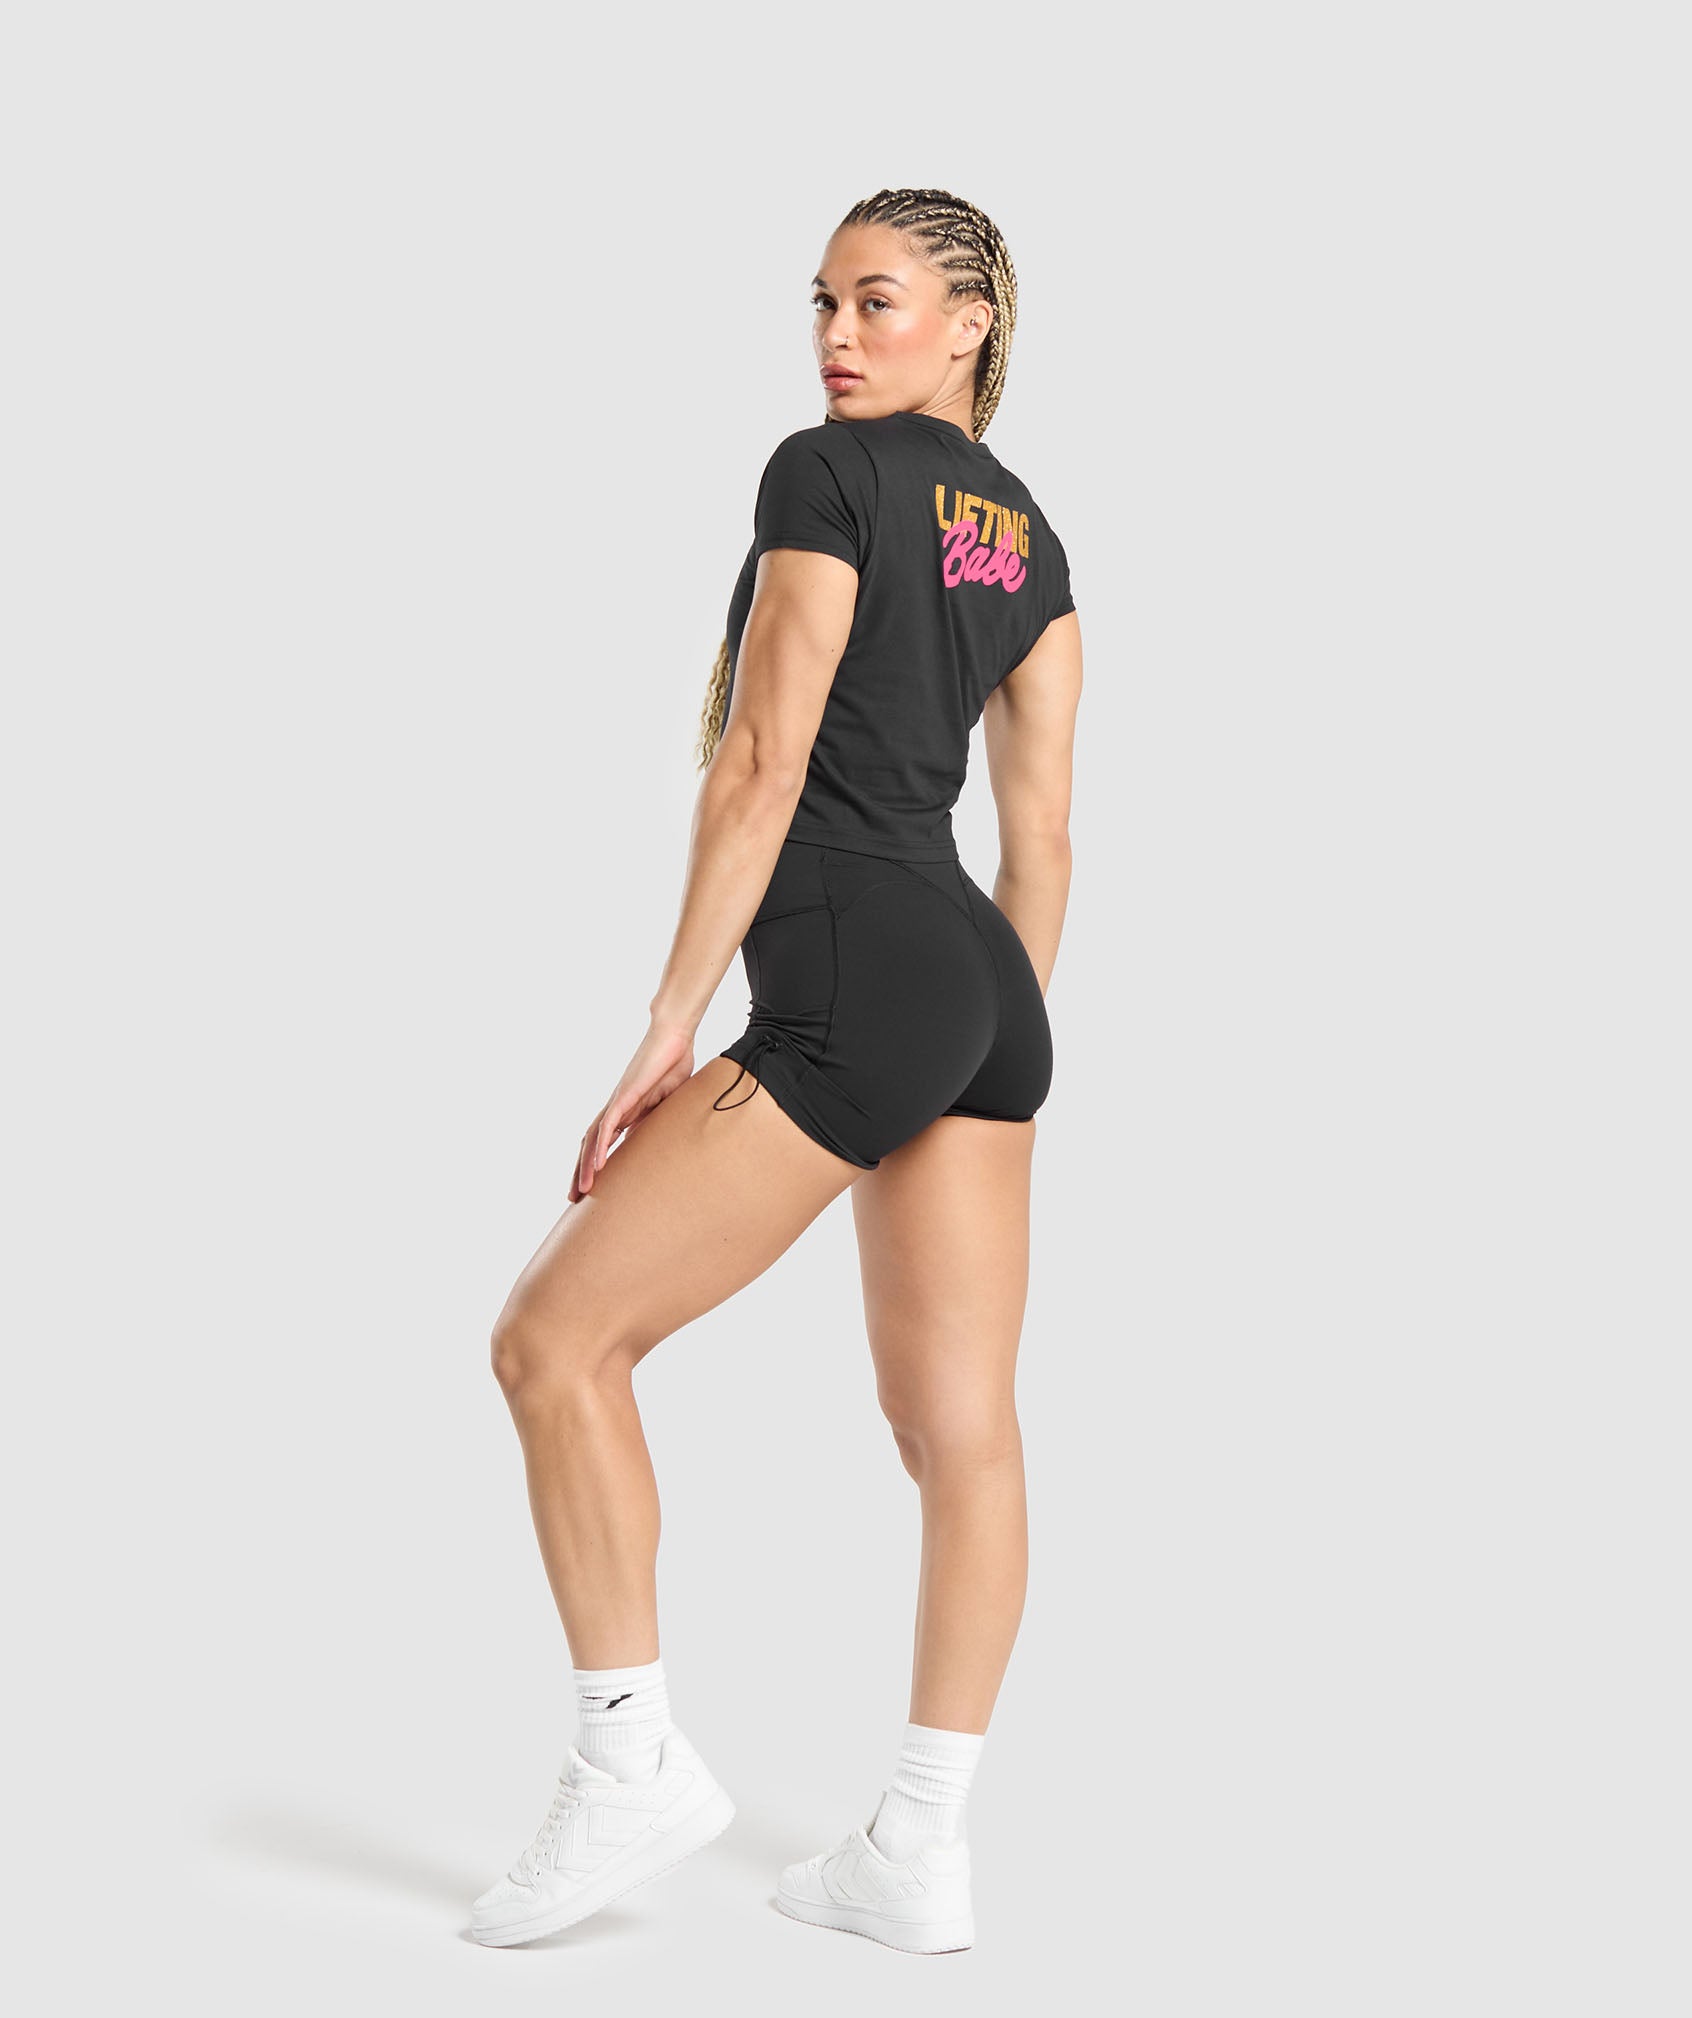 Lifting Babe Tee in Black - view 4